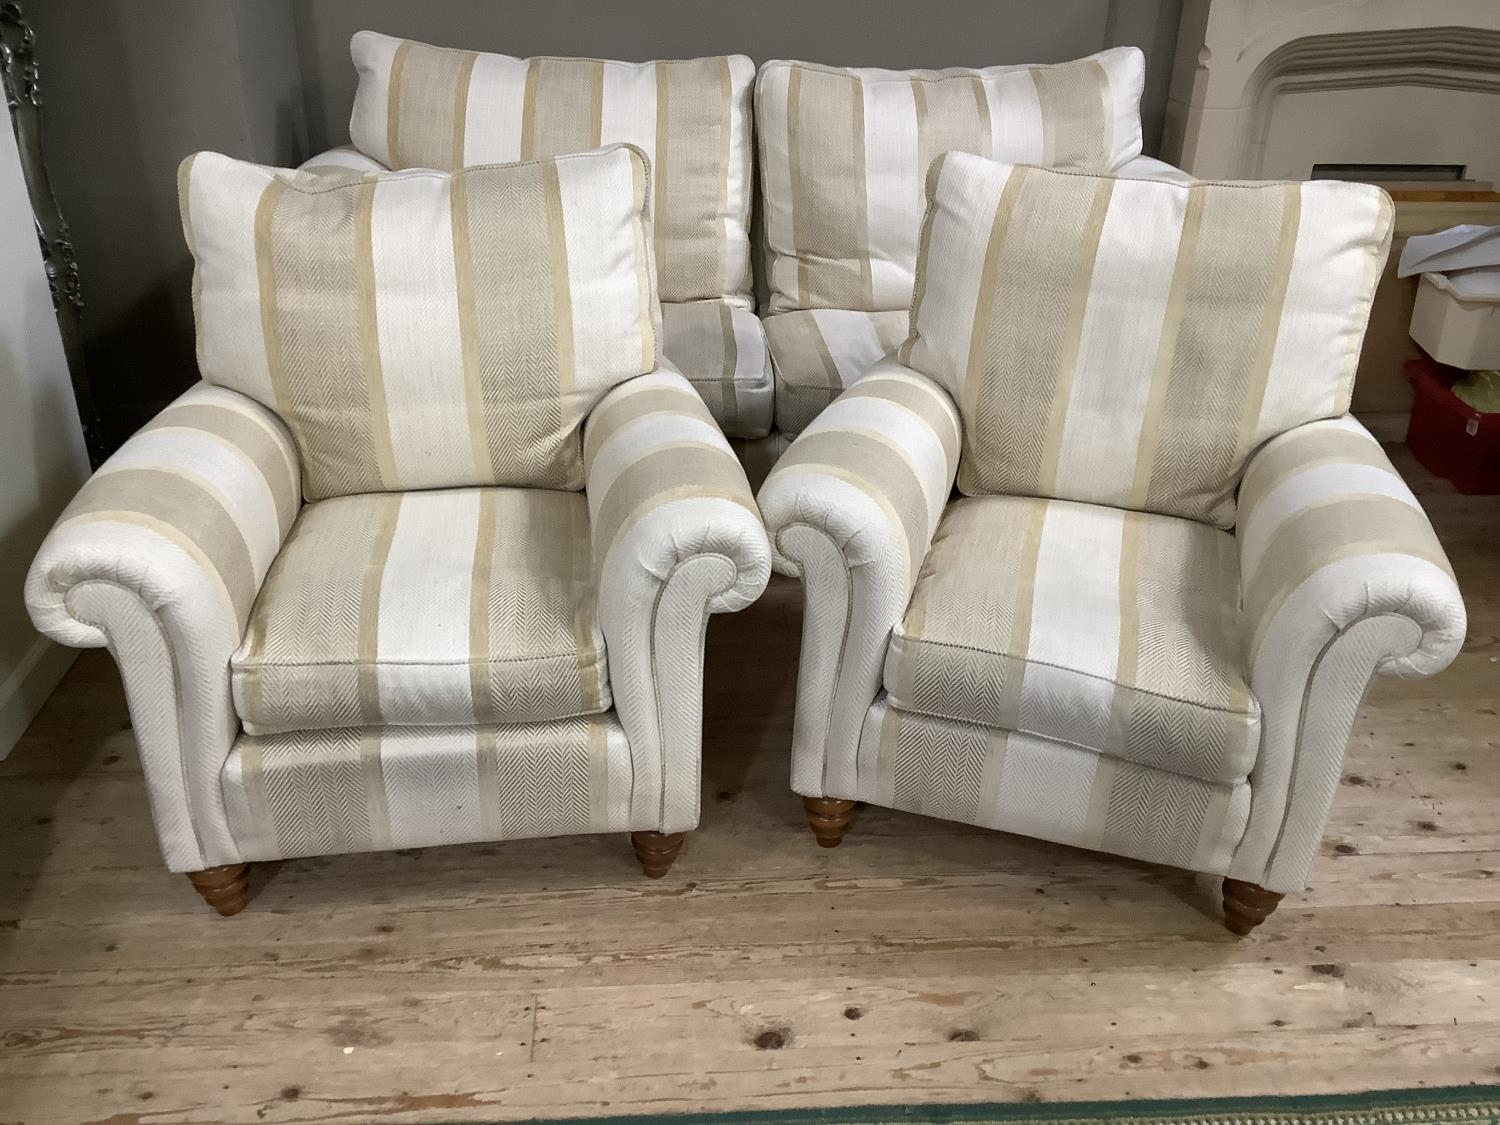 A Duresta three seater sofa upholstered in ecru and cream herringbone fabric together with two